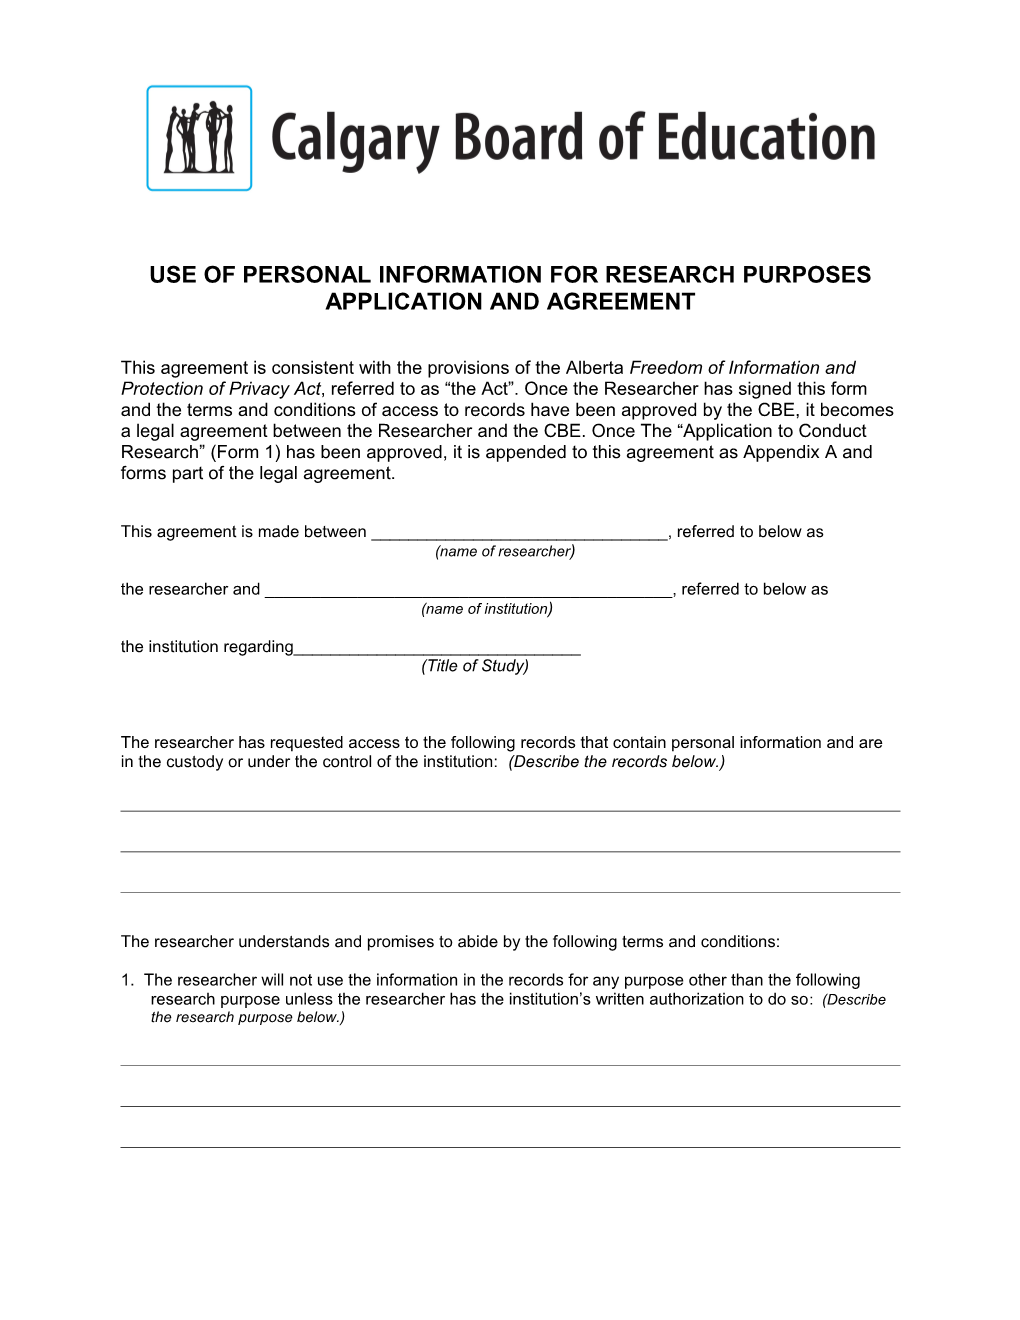 Use of Personal Information for Research Purposes Application and Agreement Form